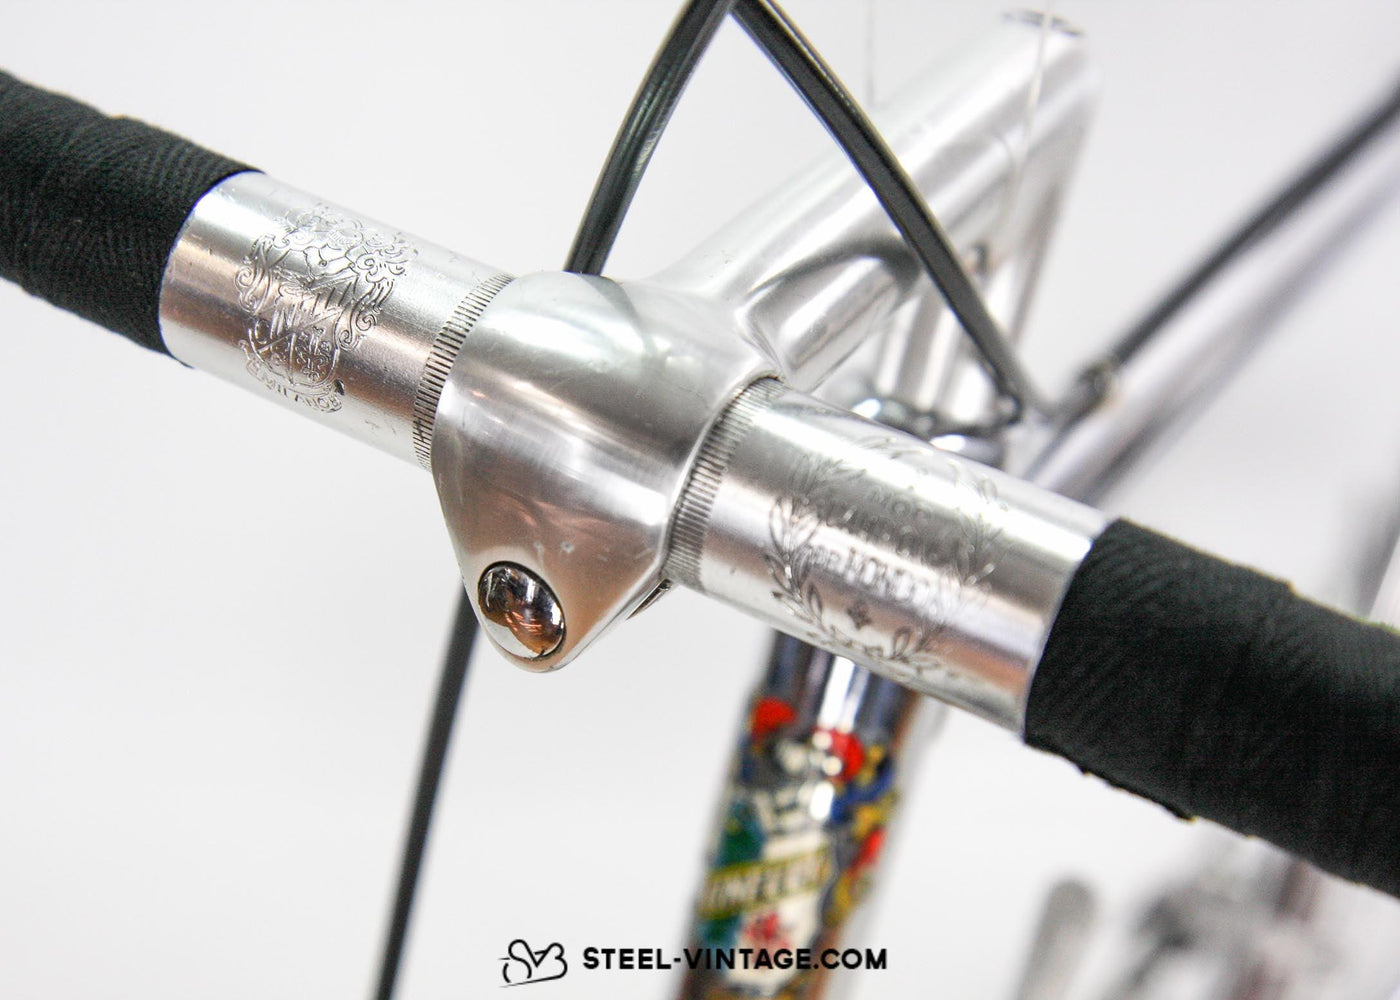 Cinelli Supercorsa Legerissimo chromed 1970s Classic Road Bicycle - Steel Vintage Bikes